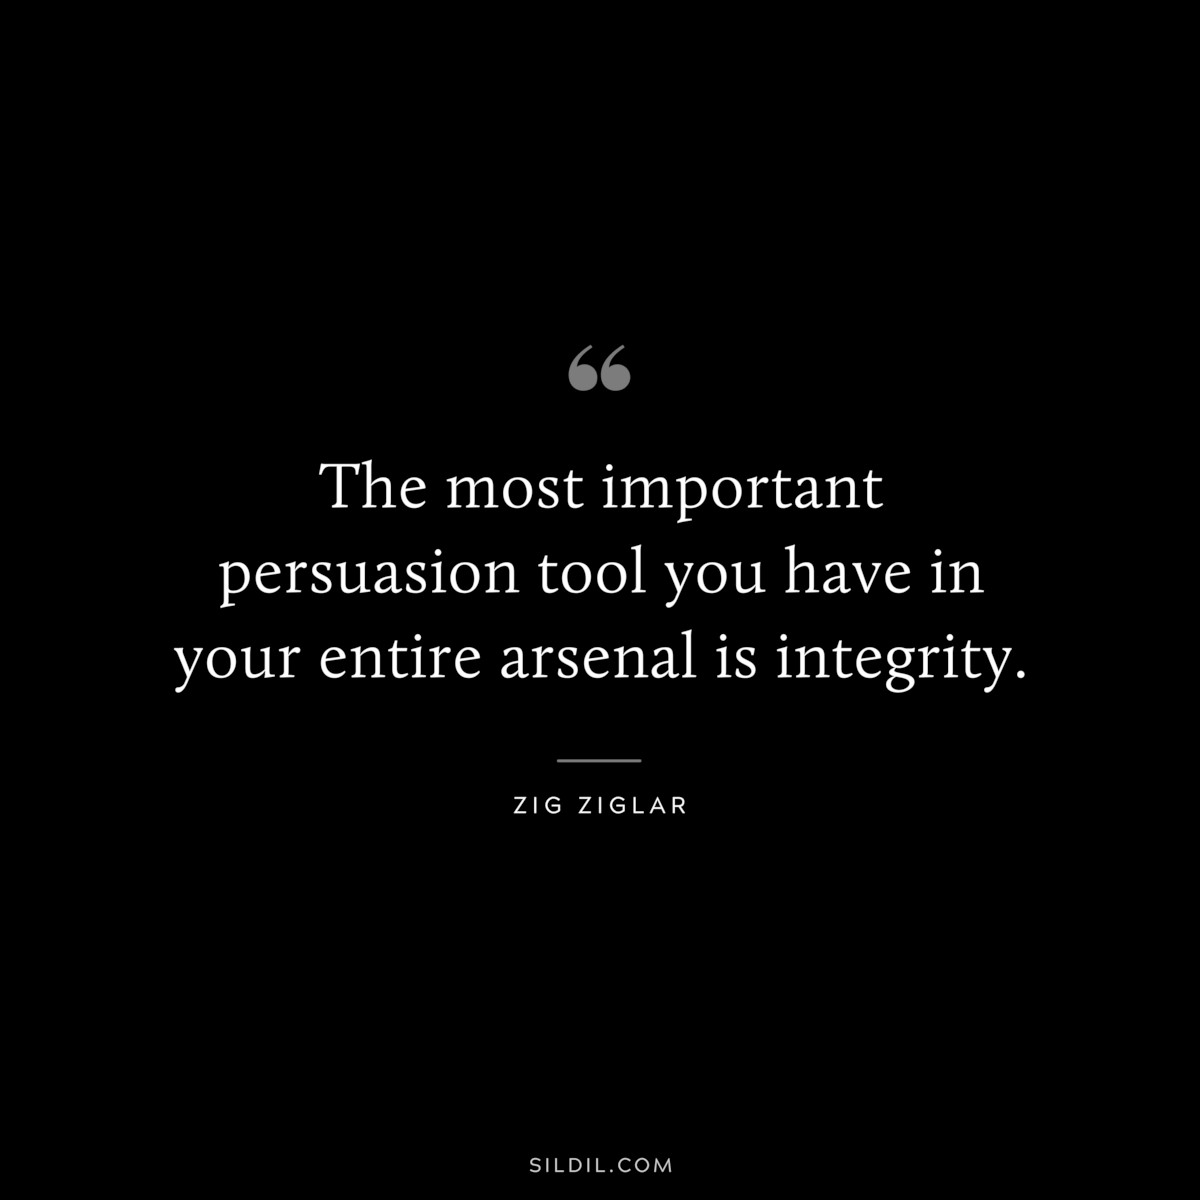 The most important persuasion tool you have in your entire arsenal is integrity. ― Zig Ziglar